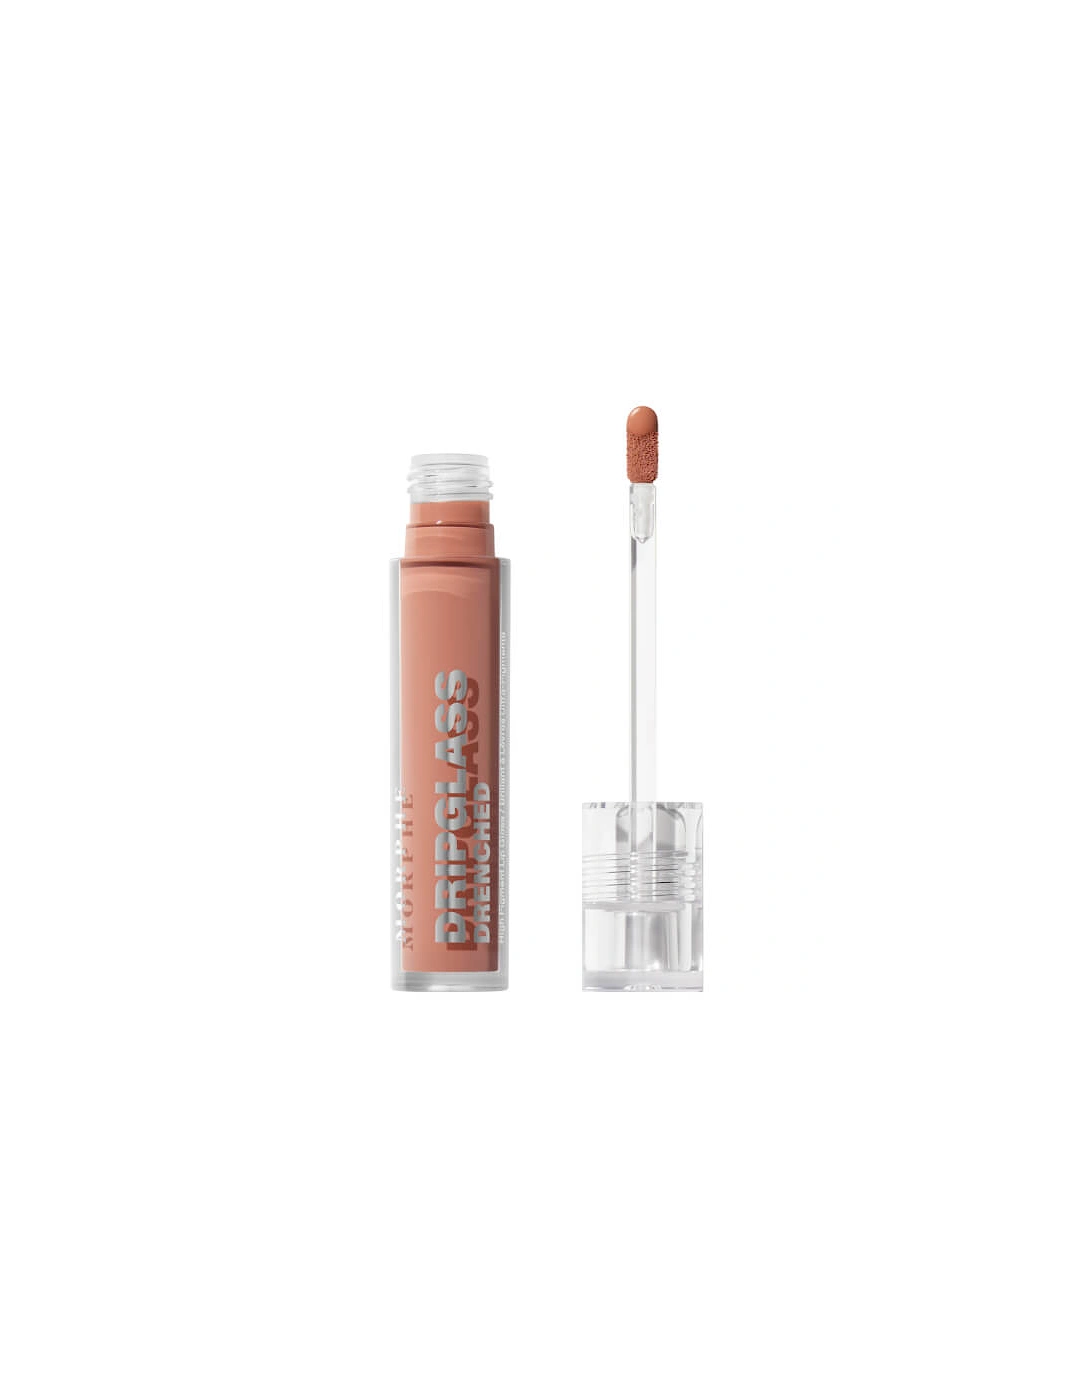 Dripglass Drenched High Pigment Lip Gloss - Naked Dip, 2 of 1